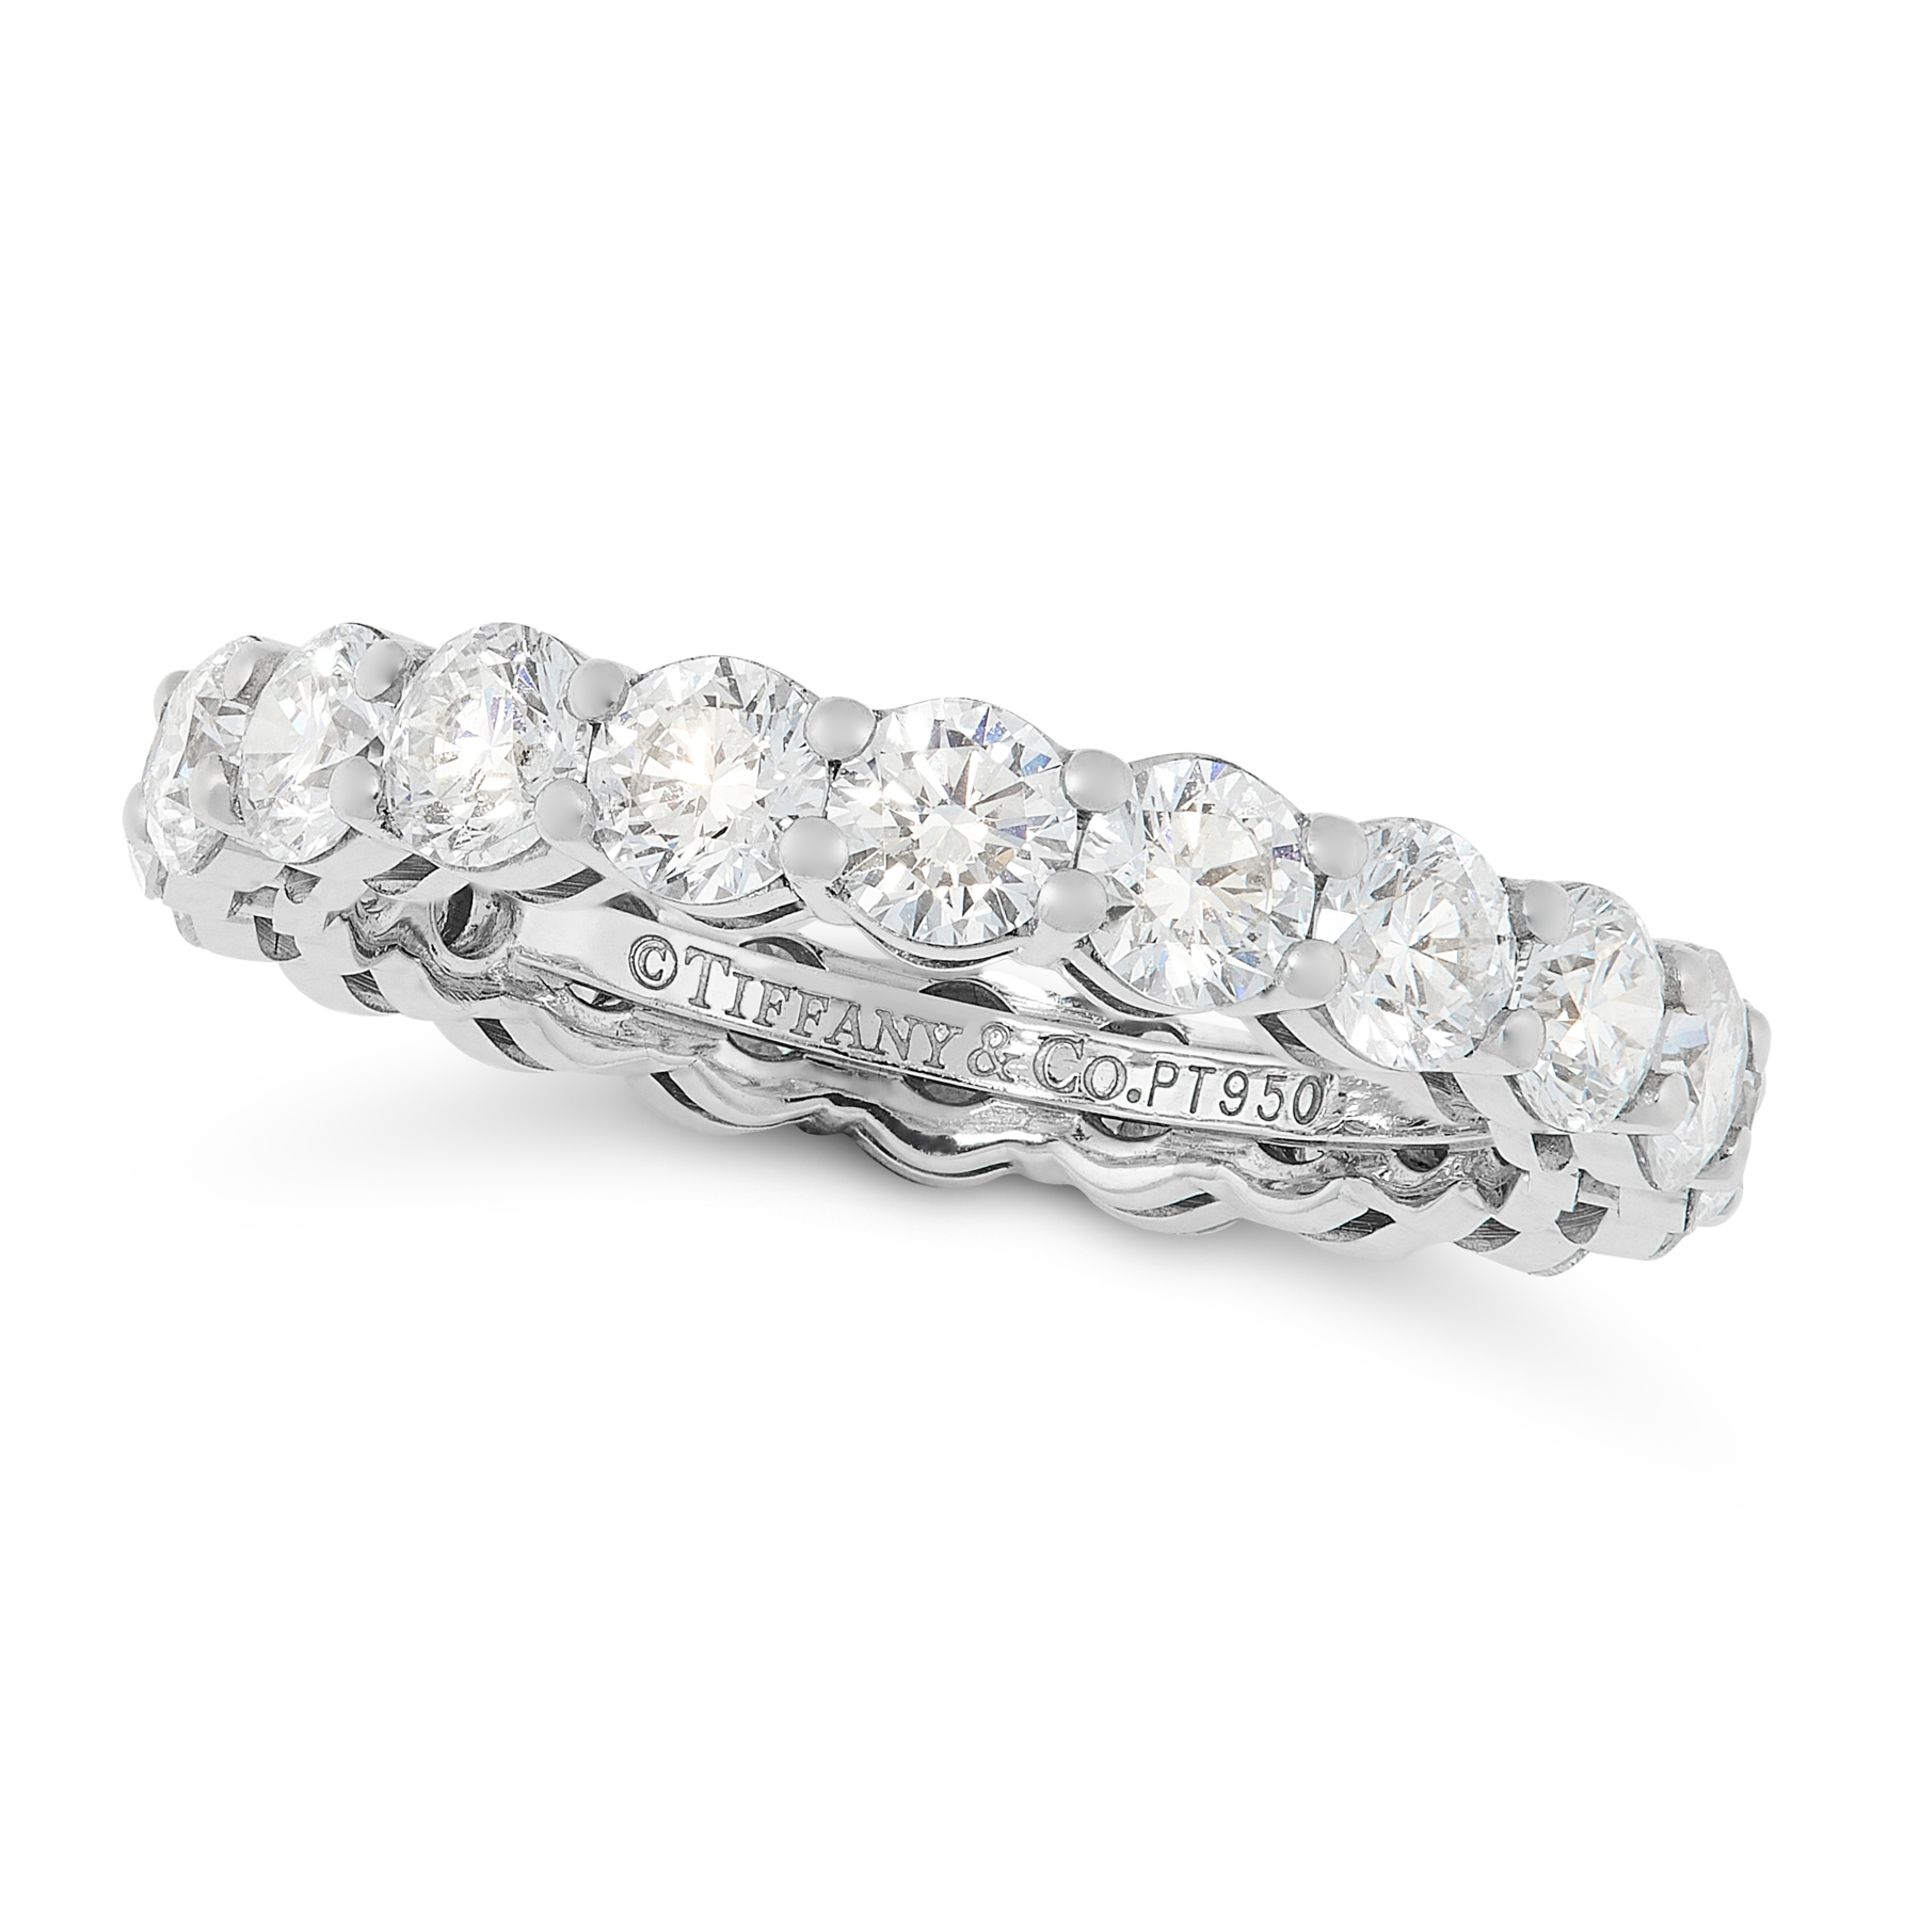 A 3.70 CARAT DIAMOND ETERNITY RING, TIFFANY & CO in platinum, designed as a full eternity band set